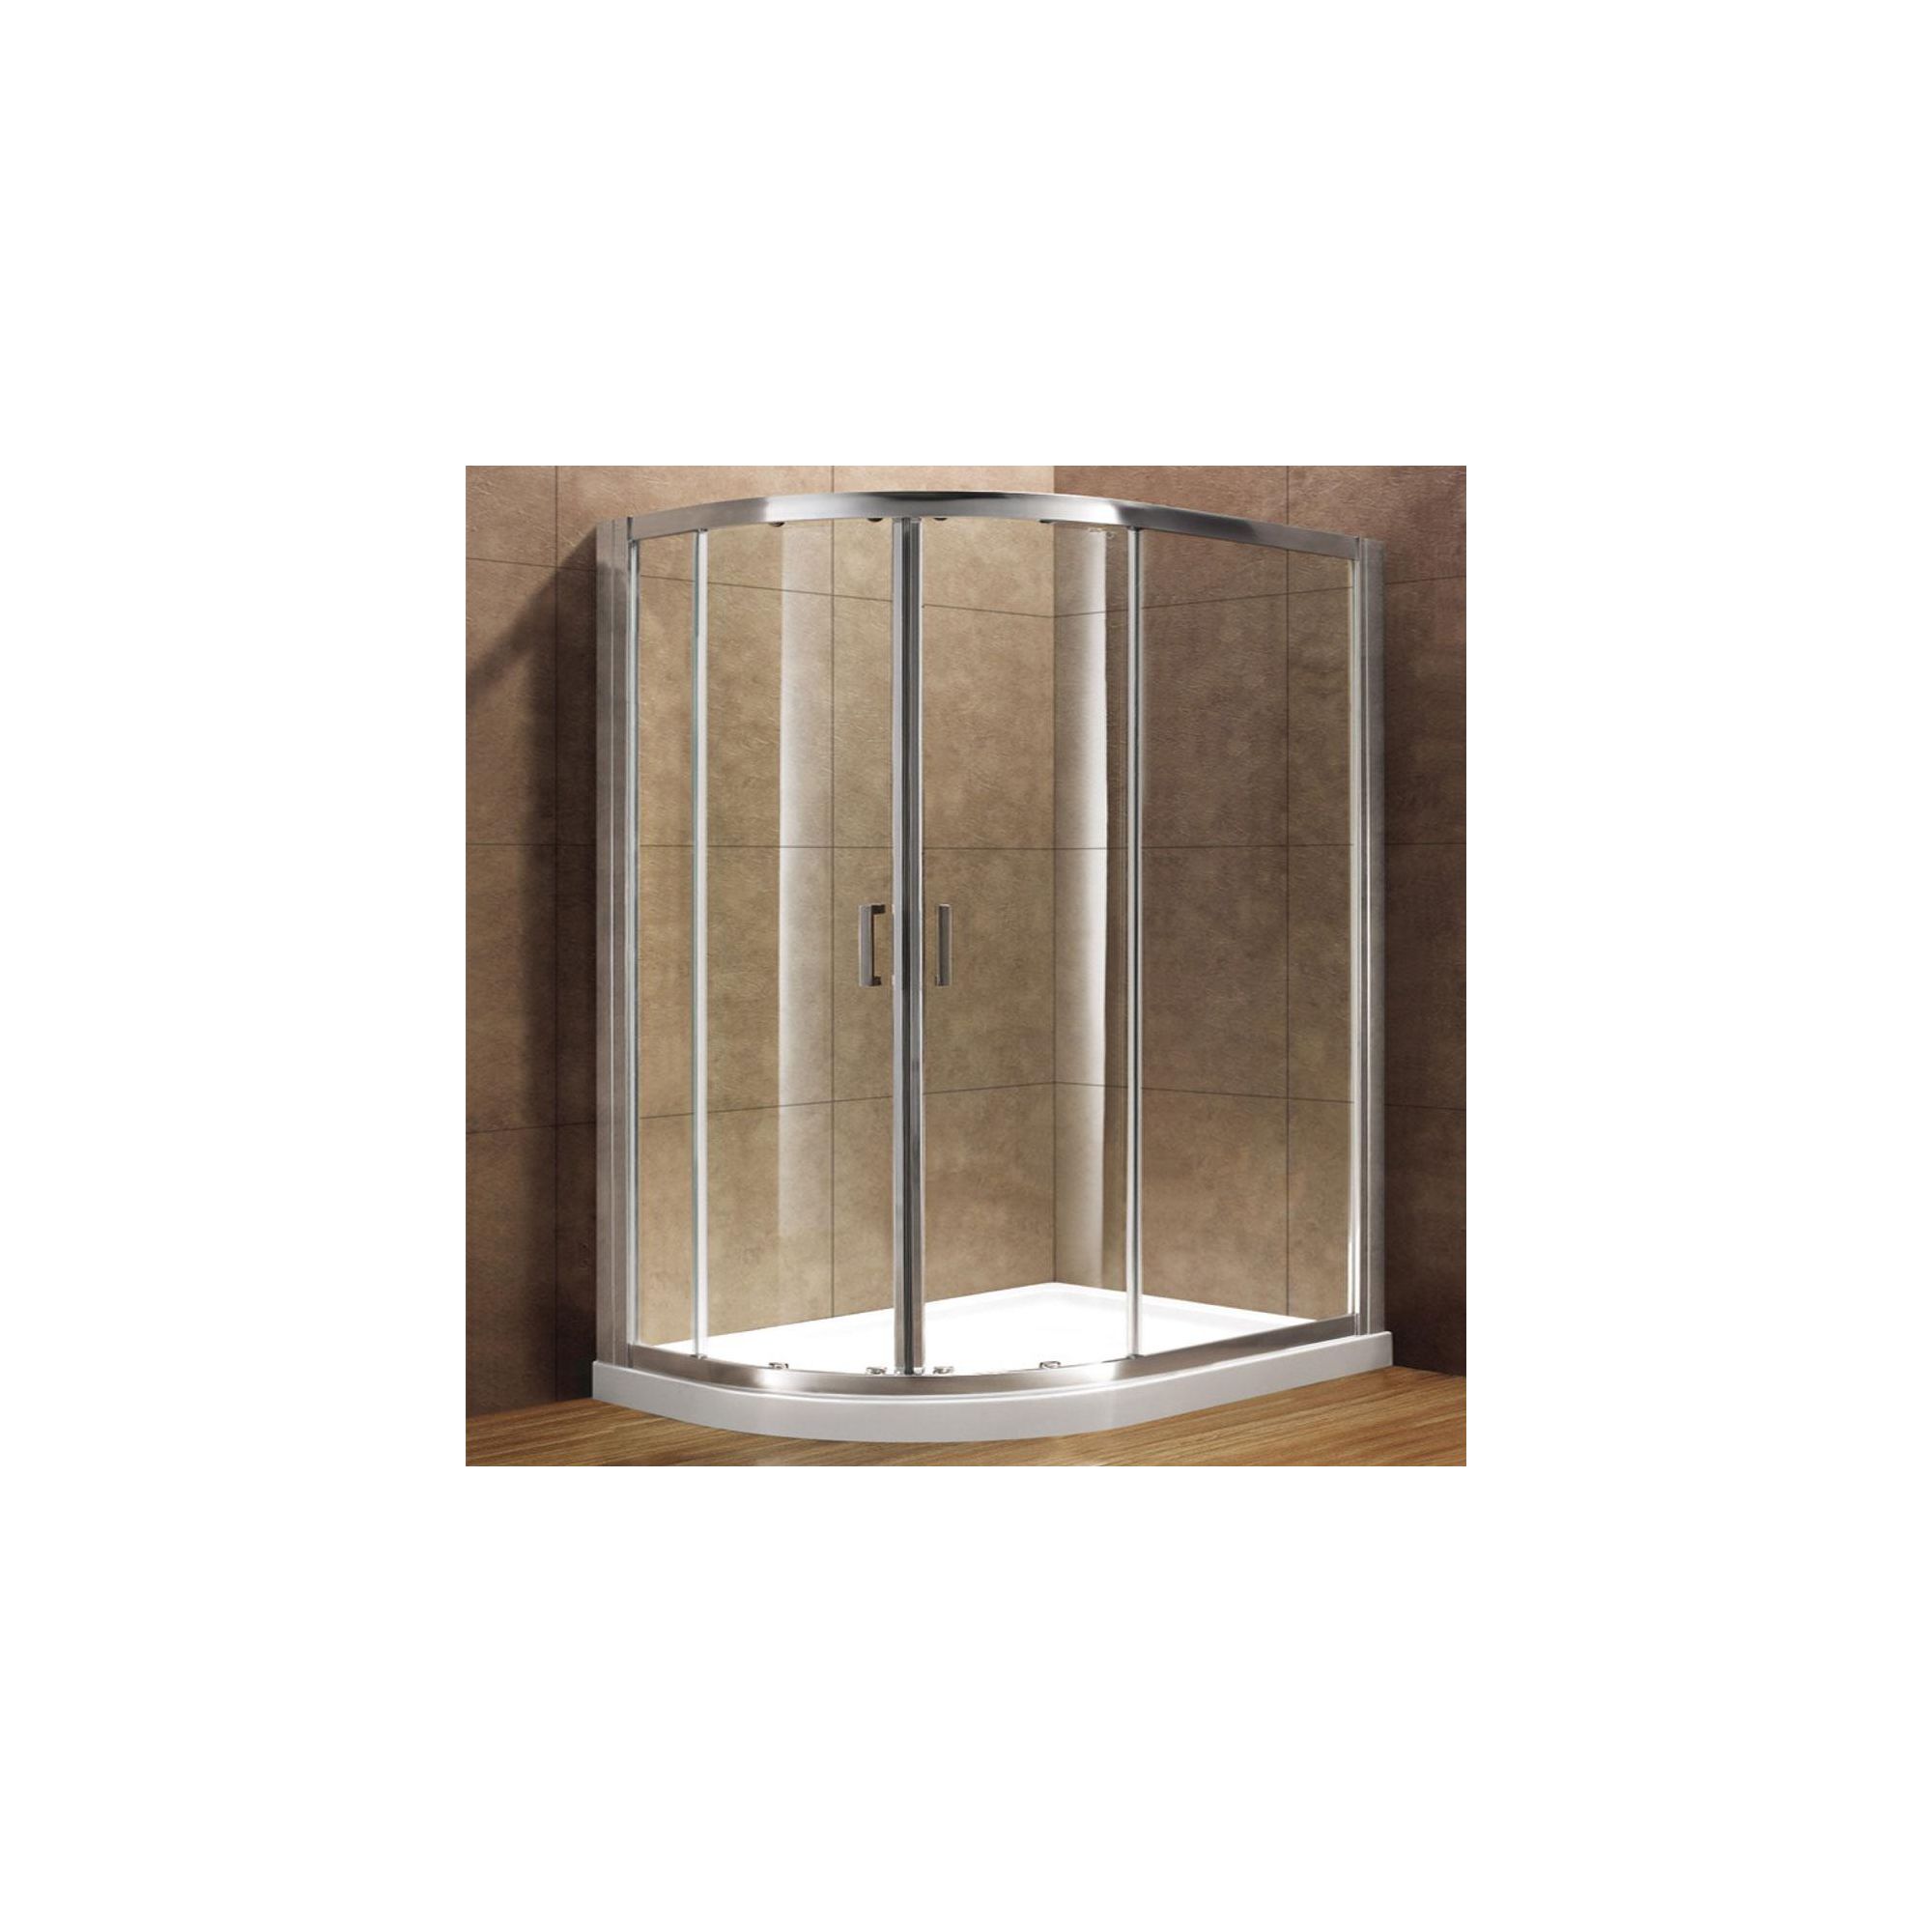 Duchy Premium Double Quadrant Door Shower Enclosure, 800mm x 800mm, 8mm Glass, Low Profile Tray at Tesco Direct